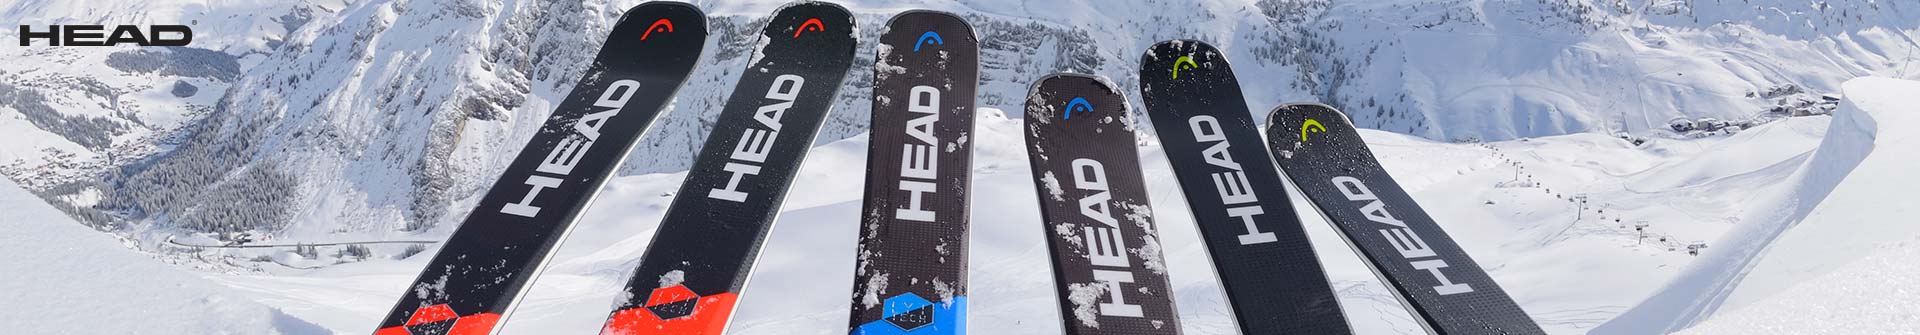 Shop Head skis & equipment at your local Source For Sports ski & snowboard store